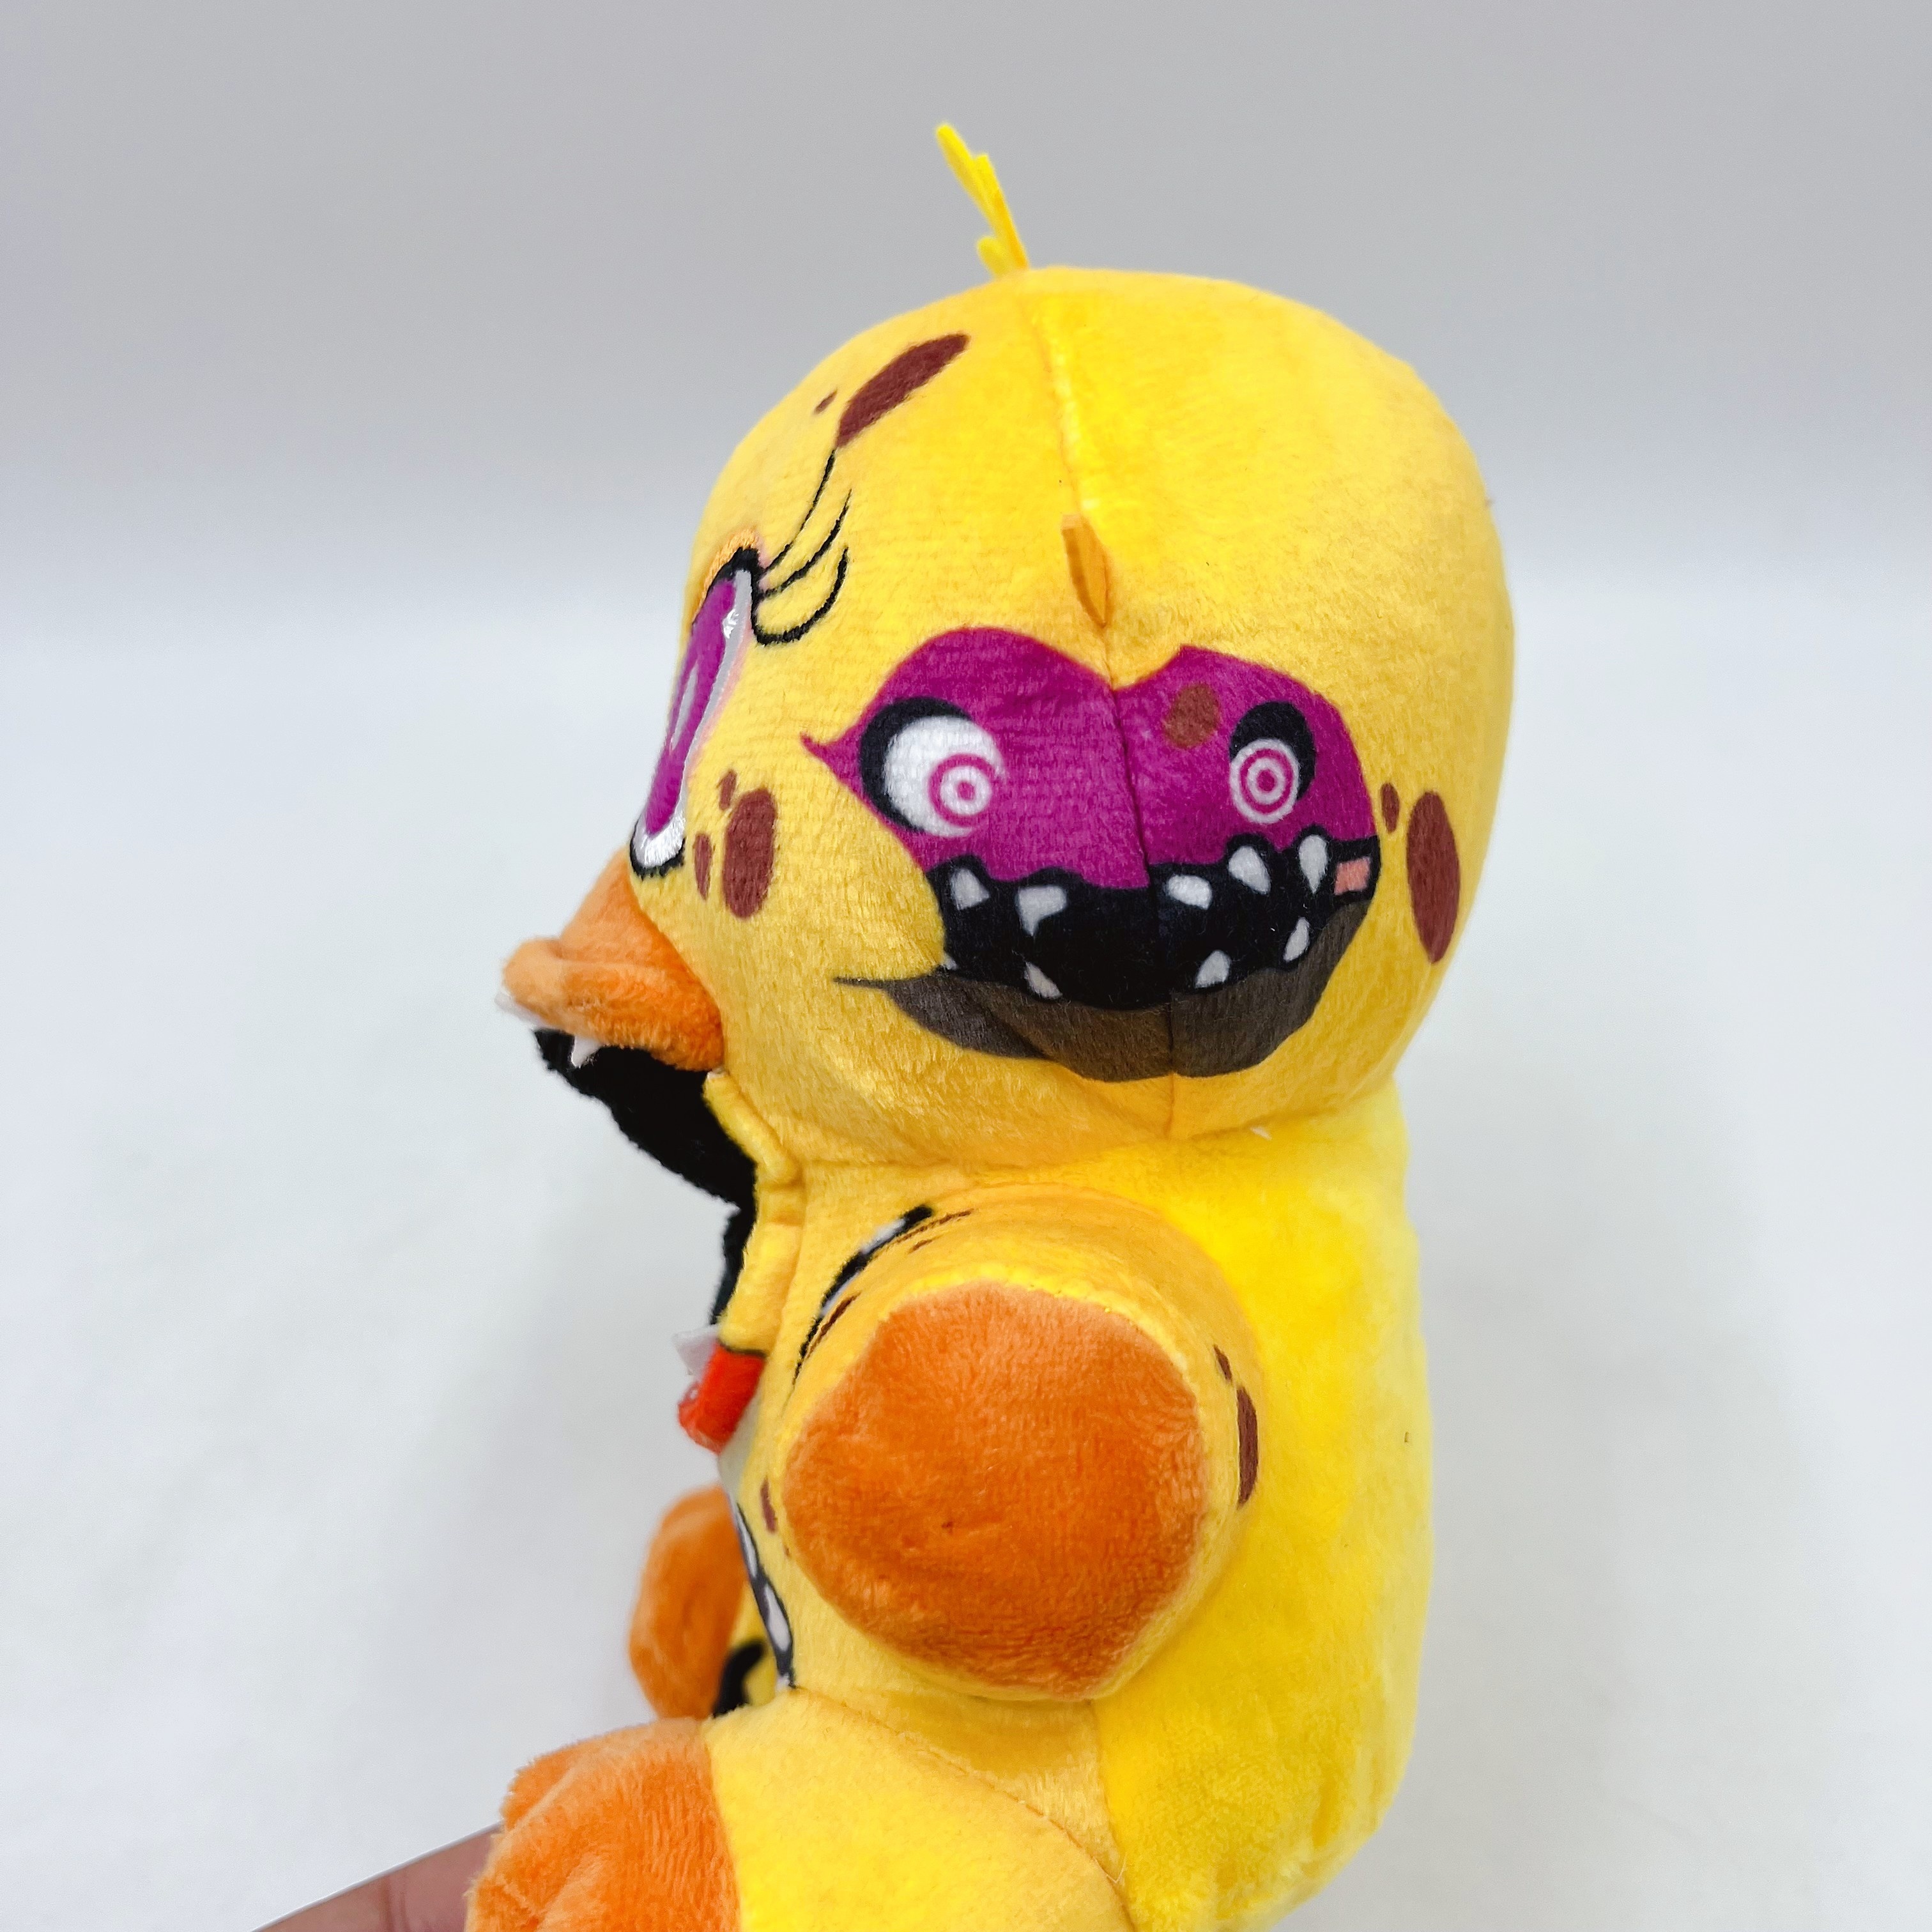  Twisted Chica Plush Toy, FNAF plushies Toy, FNAF All Character Stuffed  Animal Doll Children's Gift Collection,8” : Toys & Games